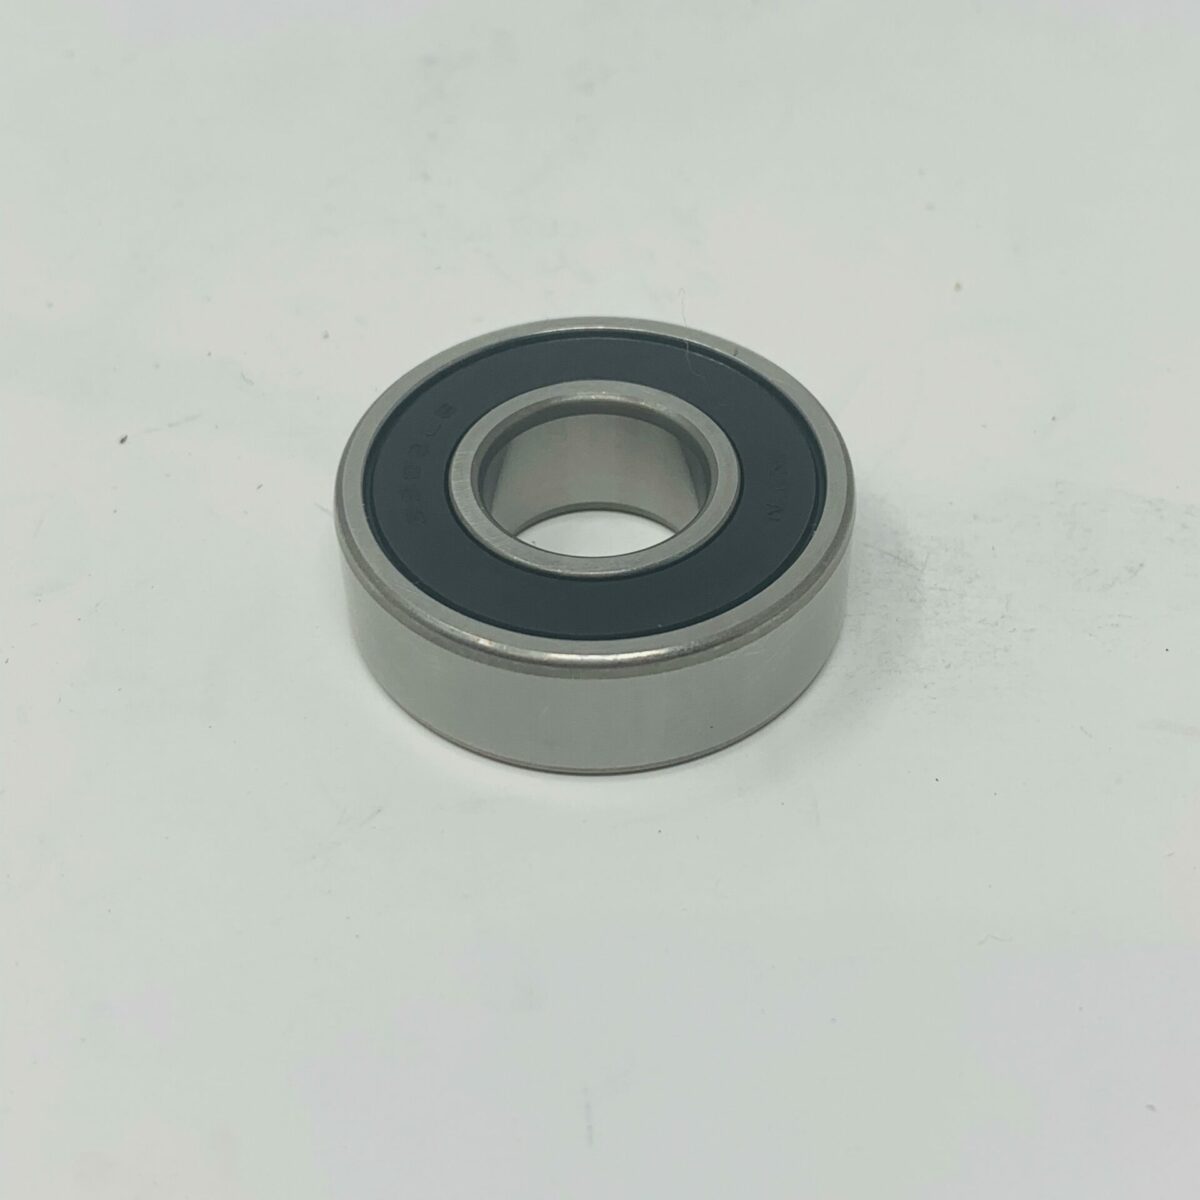 Clutch Bearing for Air Conception